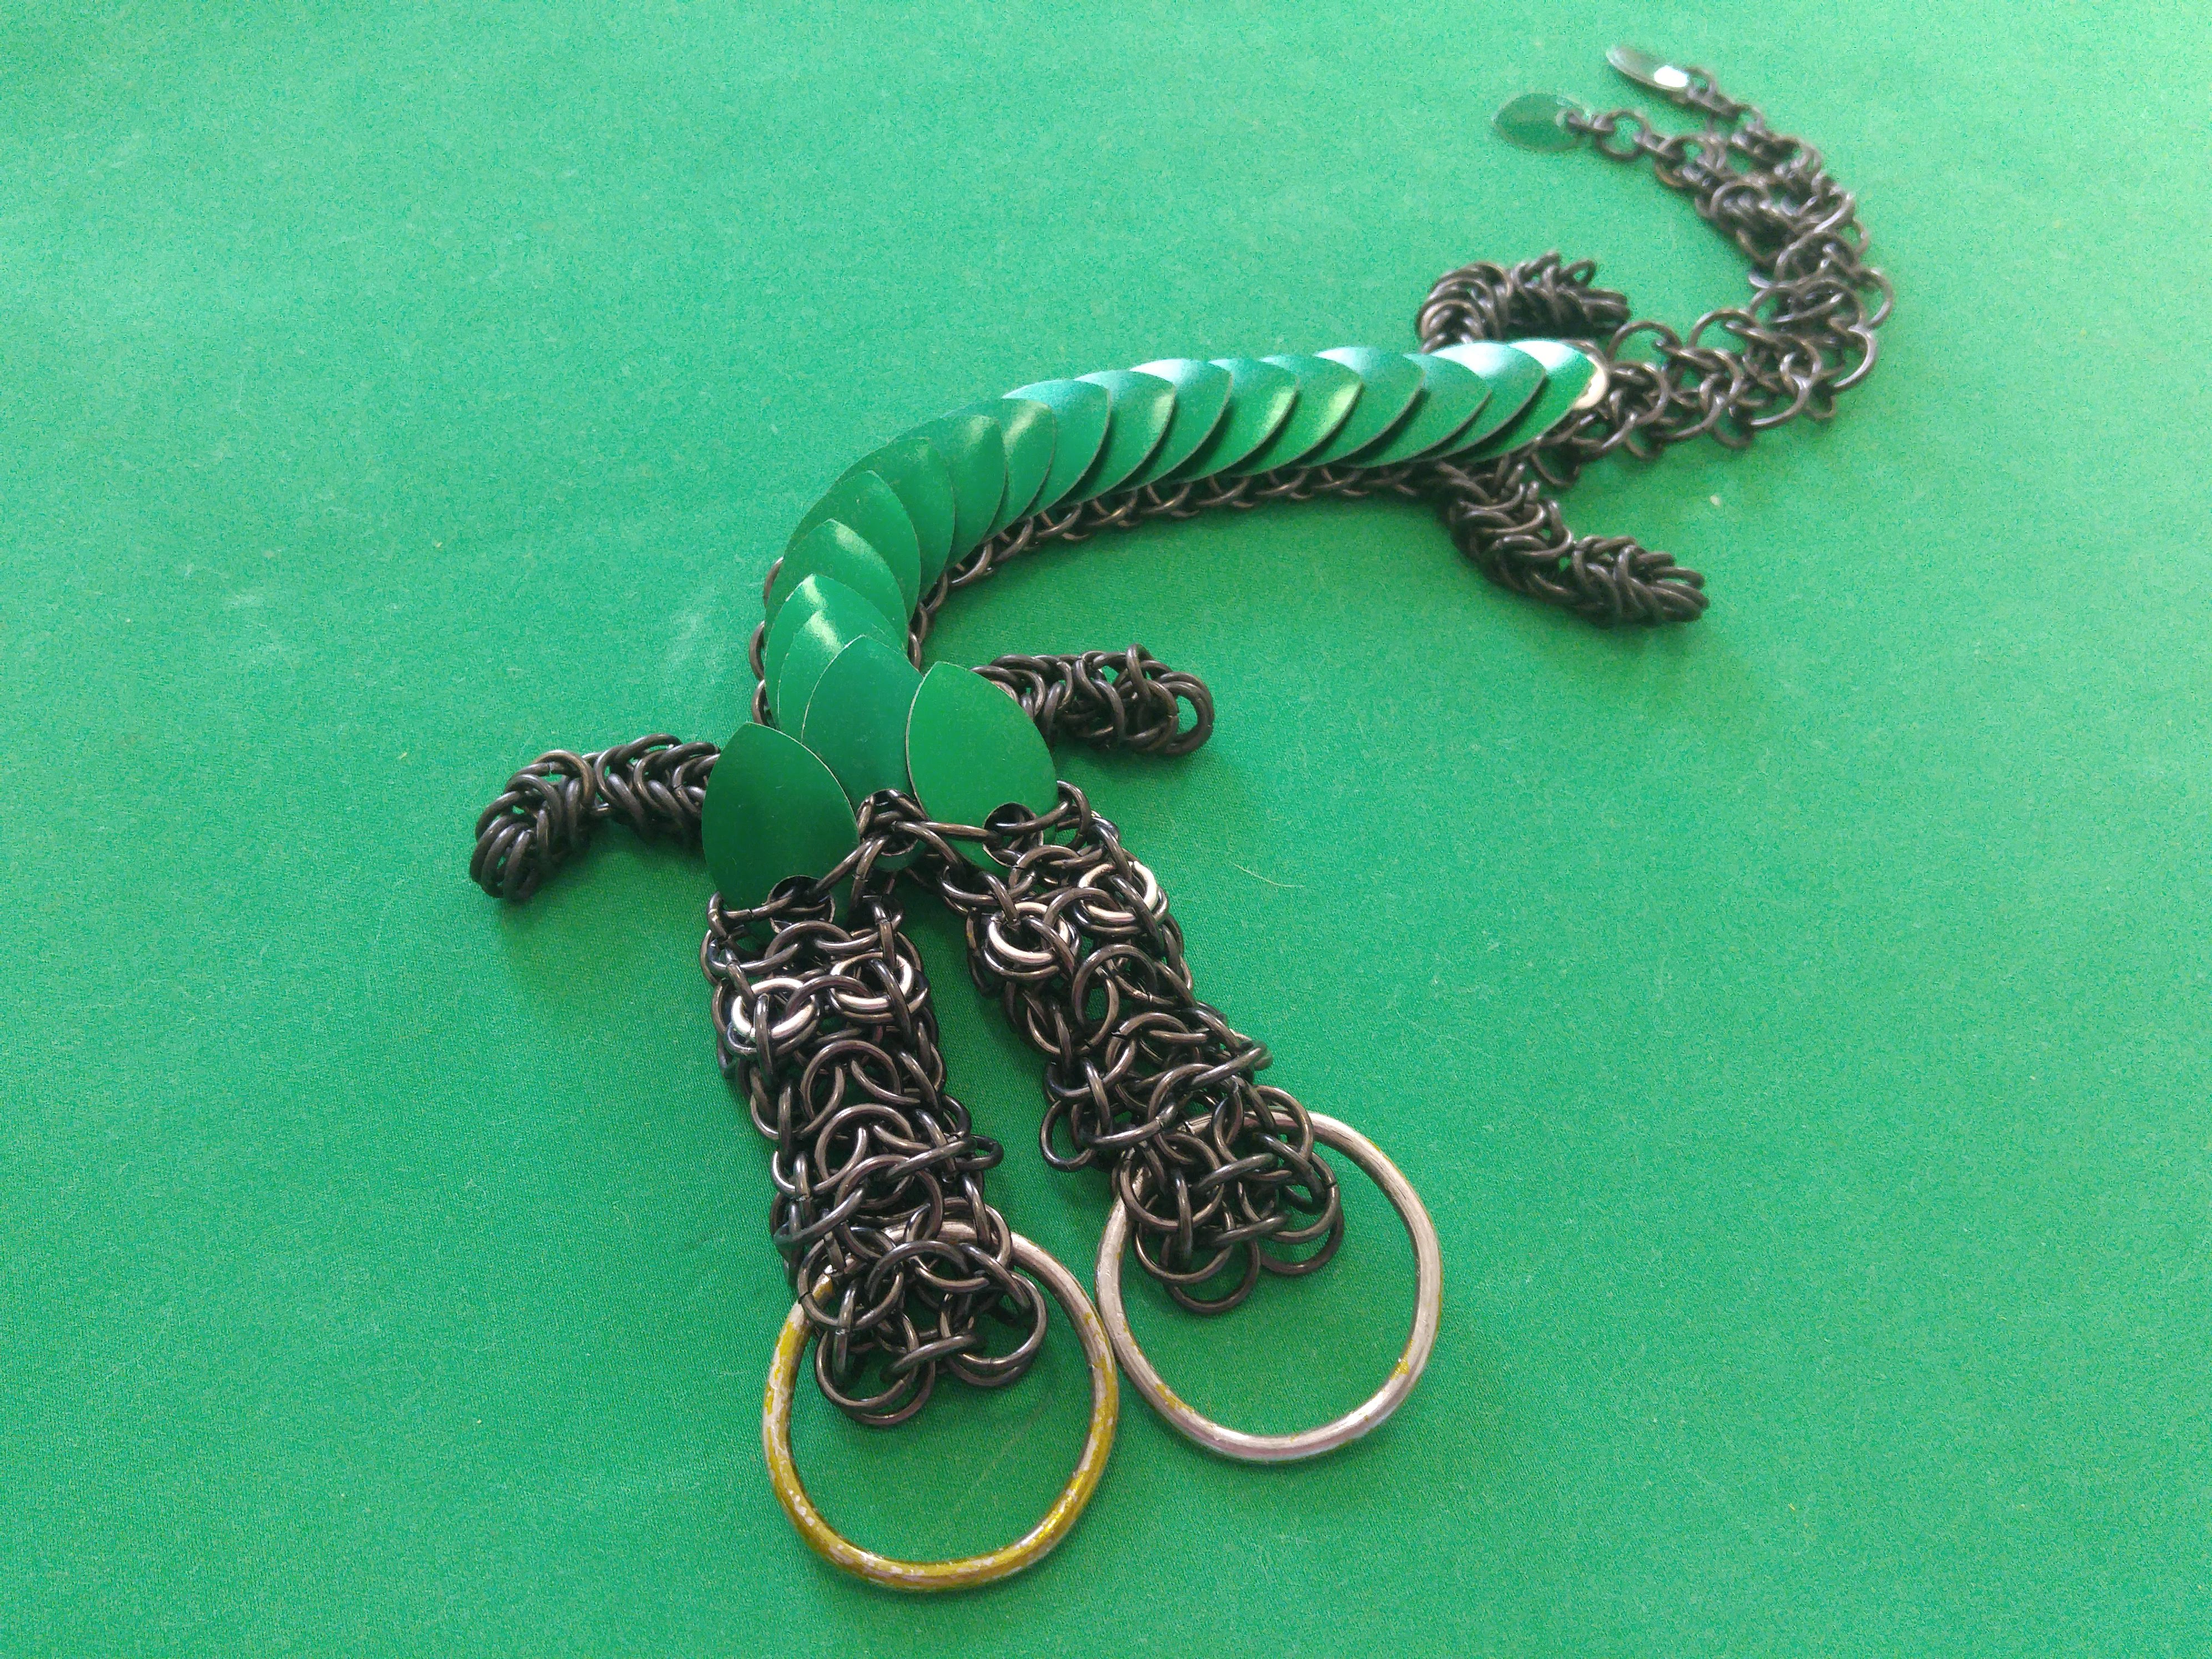 A green two-headed chainmaille dragon.